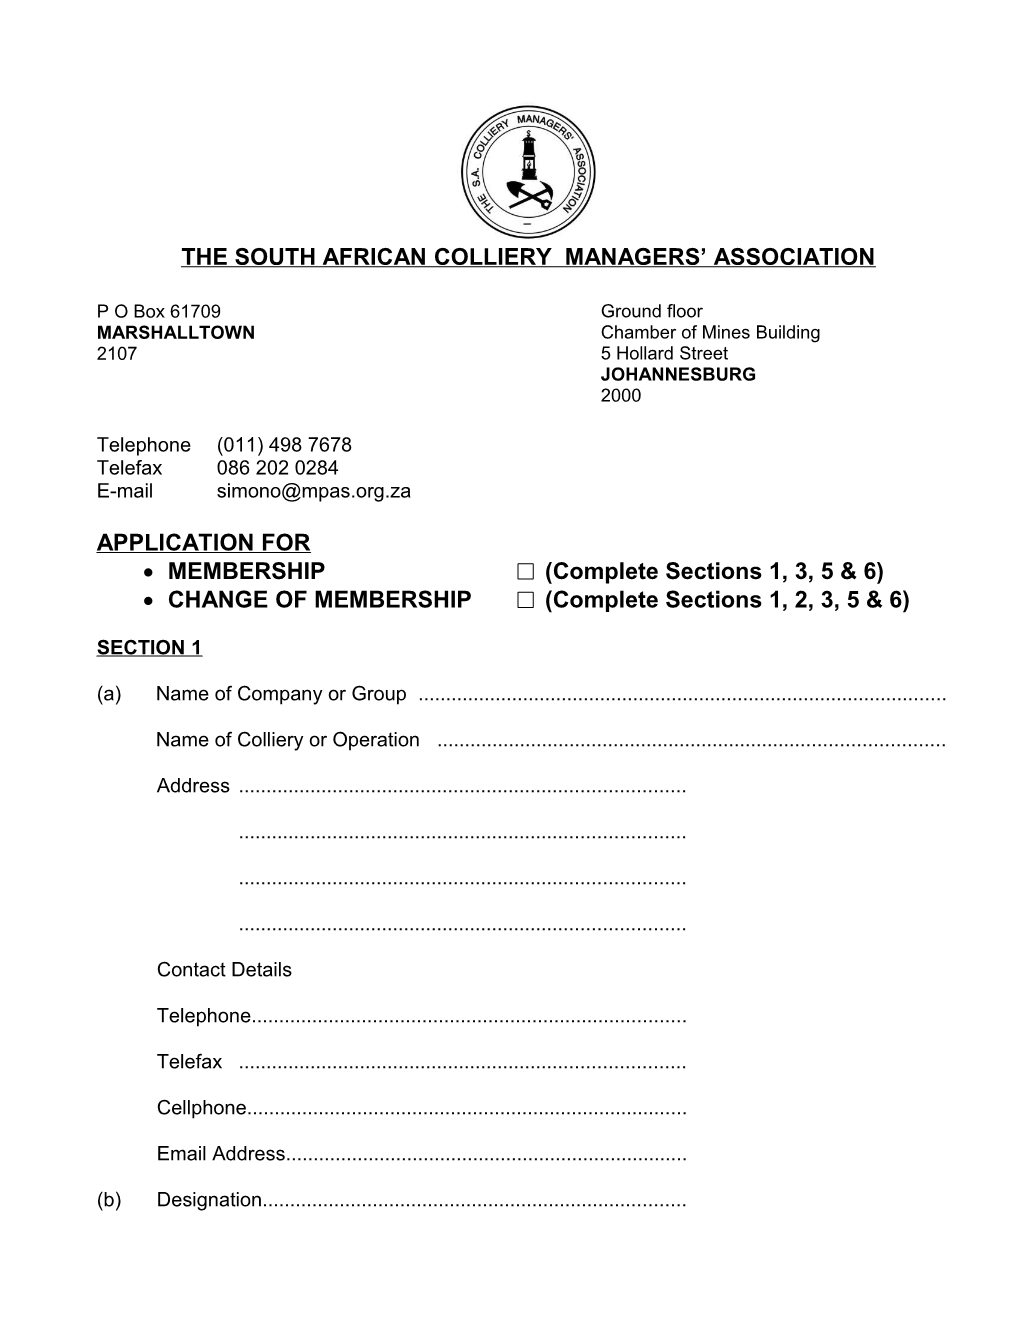 The South African Colliery Managers Association